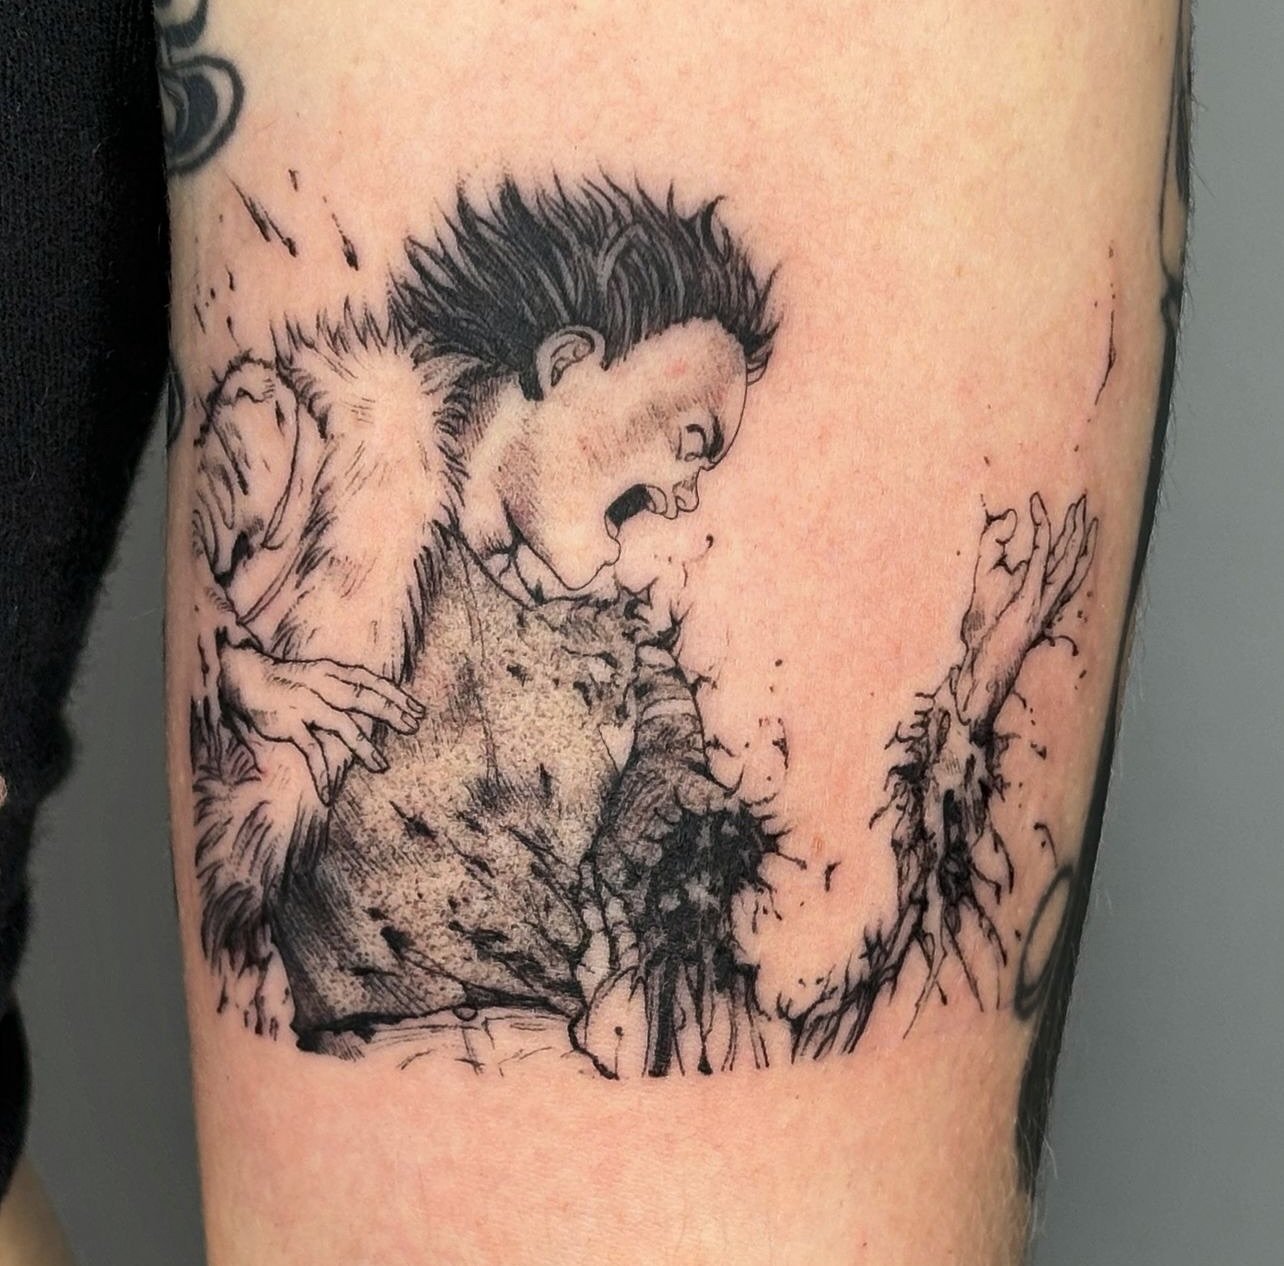 Tetsuo from Akira 😱
Artist: @alcaterin.tattoo 
________________________________________________
[At Off the Ground Ink, we bring your tattoo ideas to life! 💭 For bookings and inquiries, reach out to us by email at offthegroundink@gmail.com]
.
.
.
.